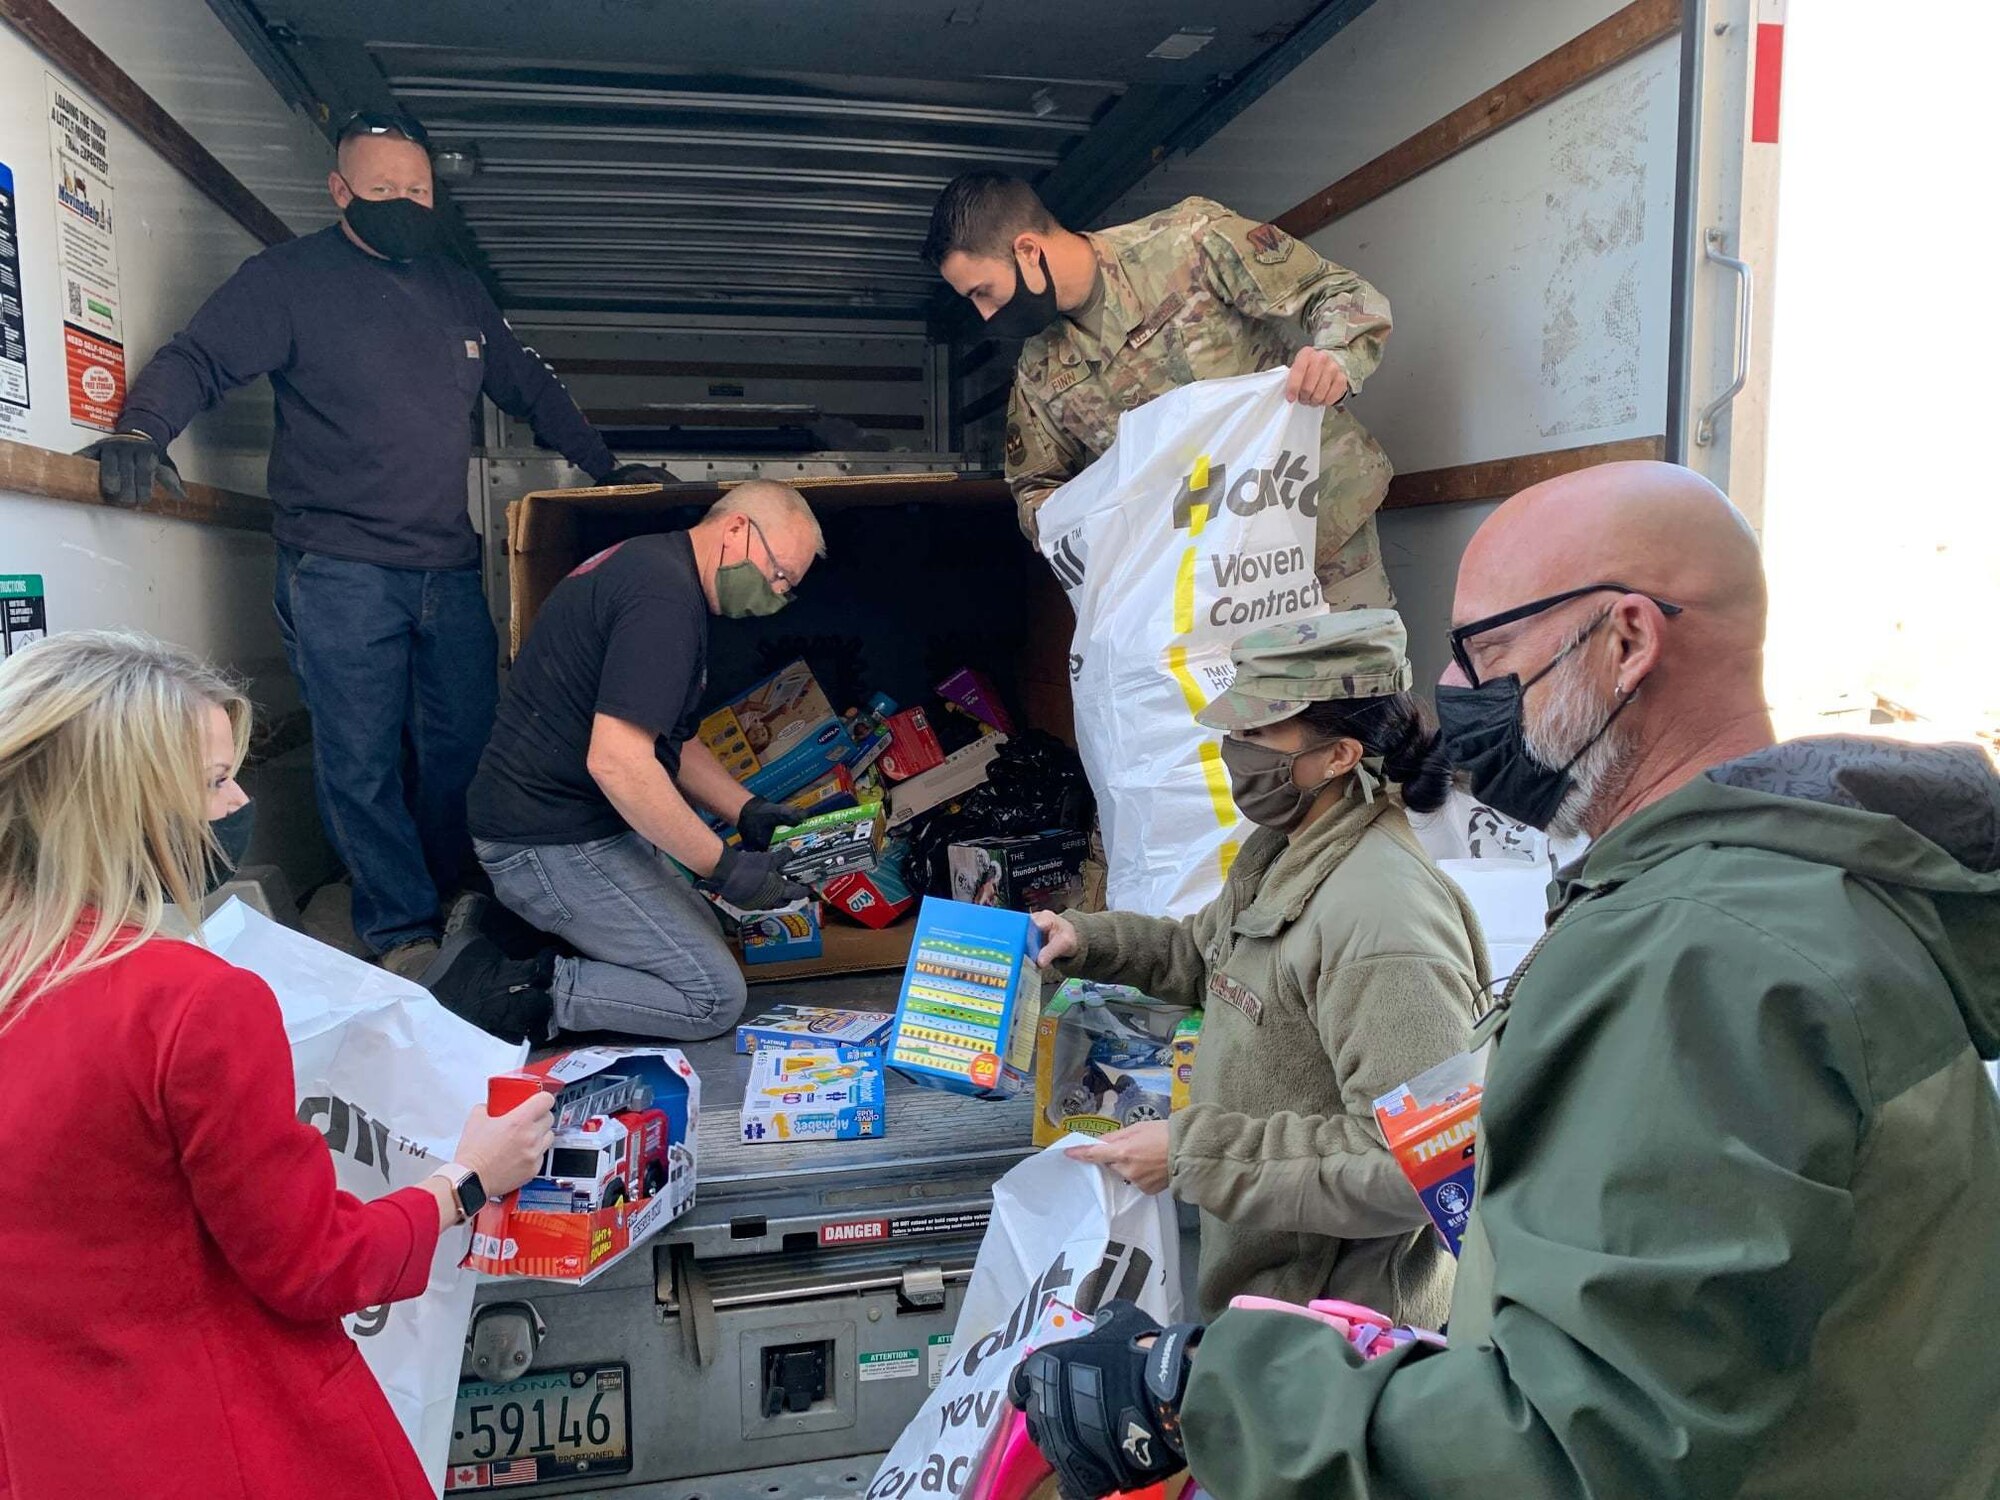 Santa’s little helpers are working hard to get ready for the 926th Wing Airman and Family Readiness Operation Holiday Hope event, Dec. 2, 2020 at Nellis Air Force Base, Nev. (U.S. Air Force photo by Natalie Stanley)